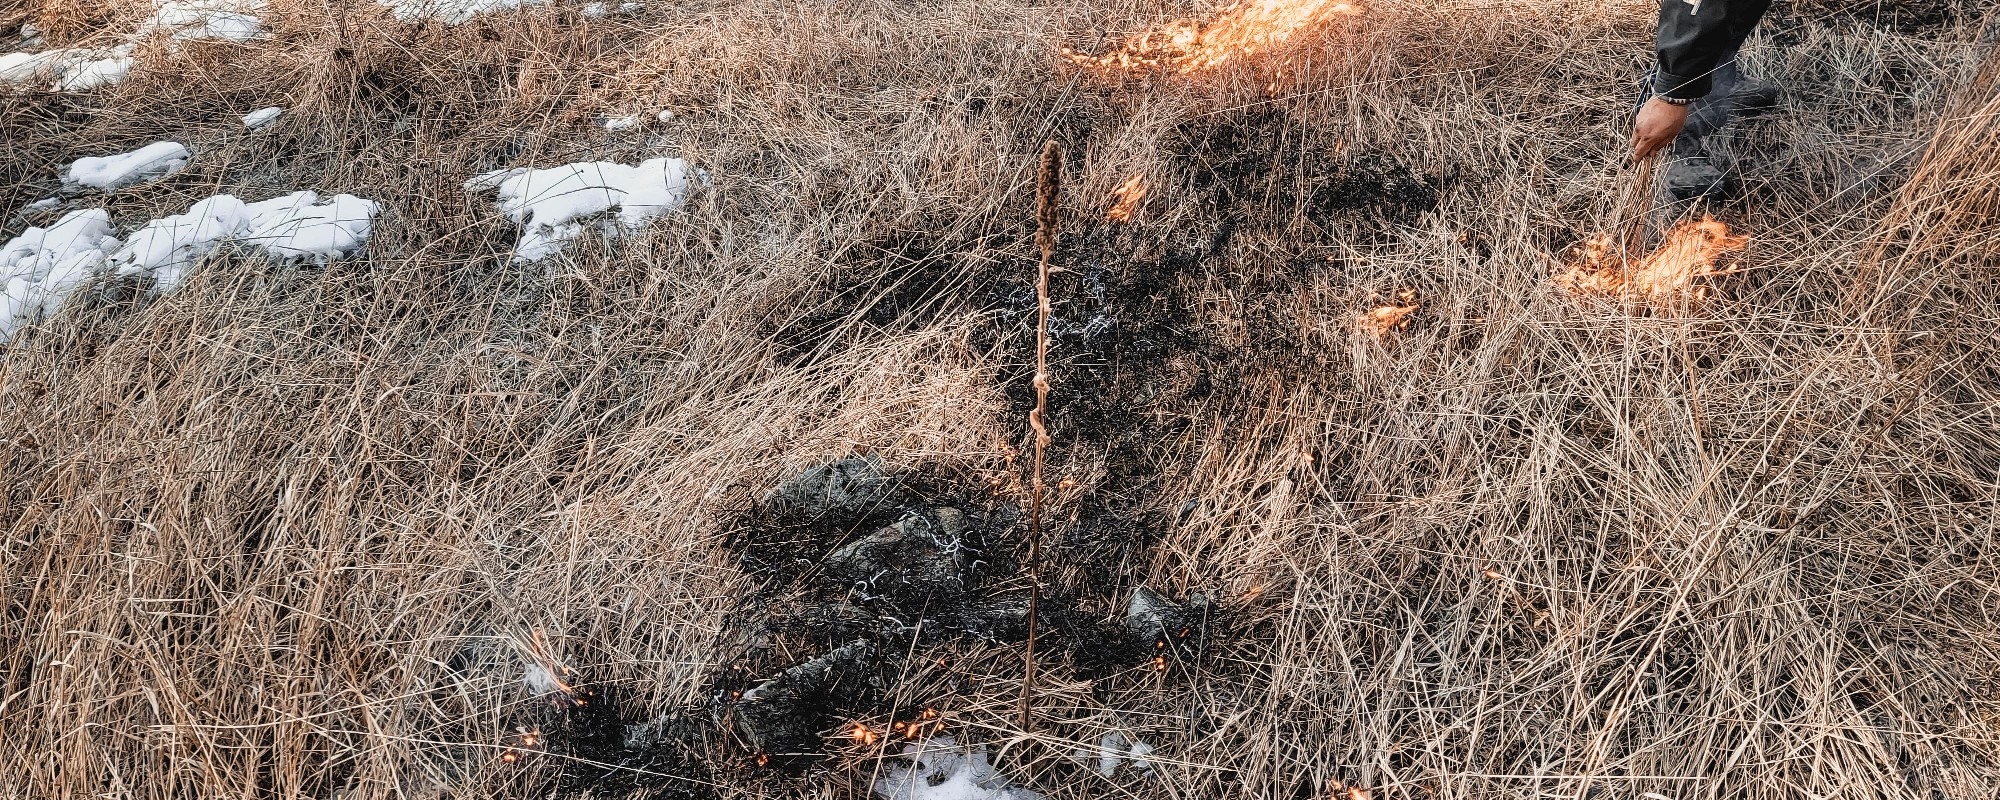 A cultural burn during the winter in Central B.C.; there is a small burn area with very little flame in the middle of brown grass, some snow on the ground and a hand holding a small stick with flame 